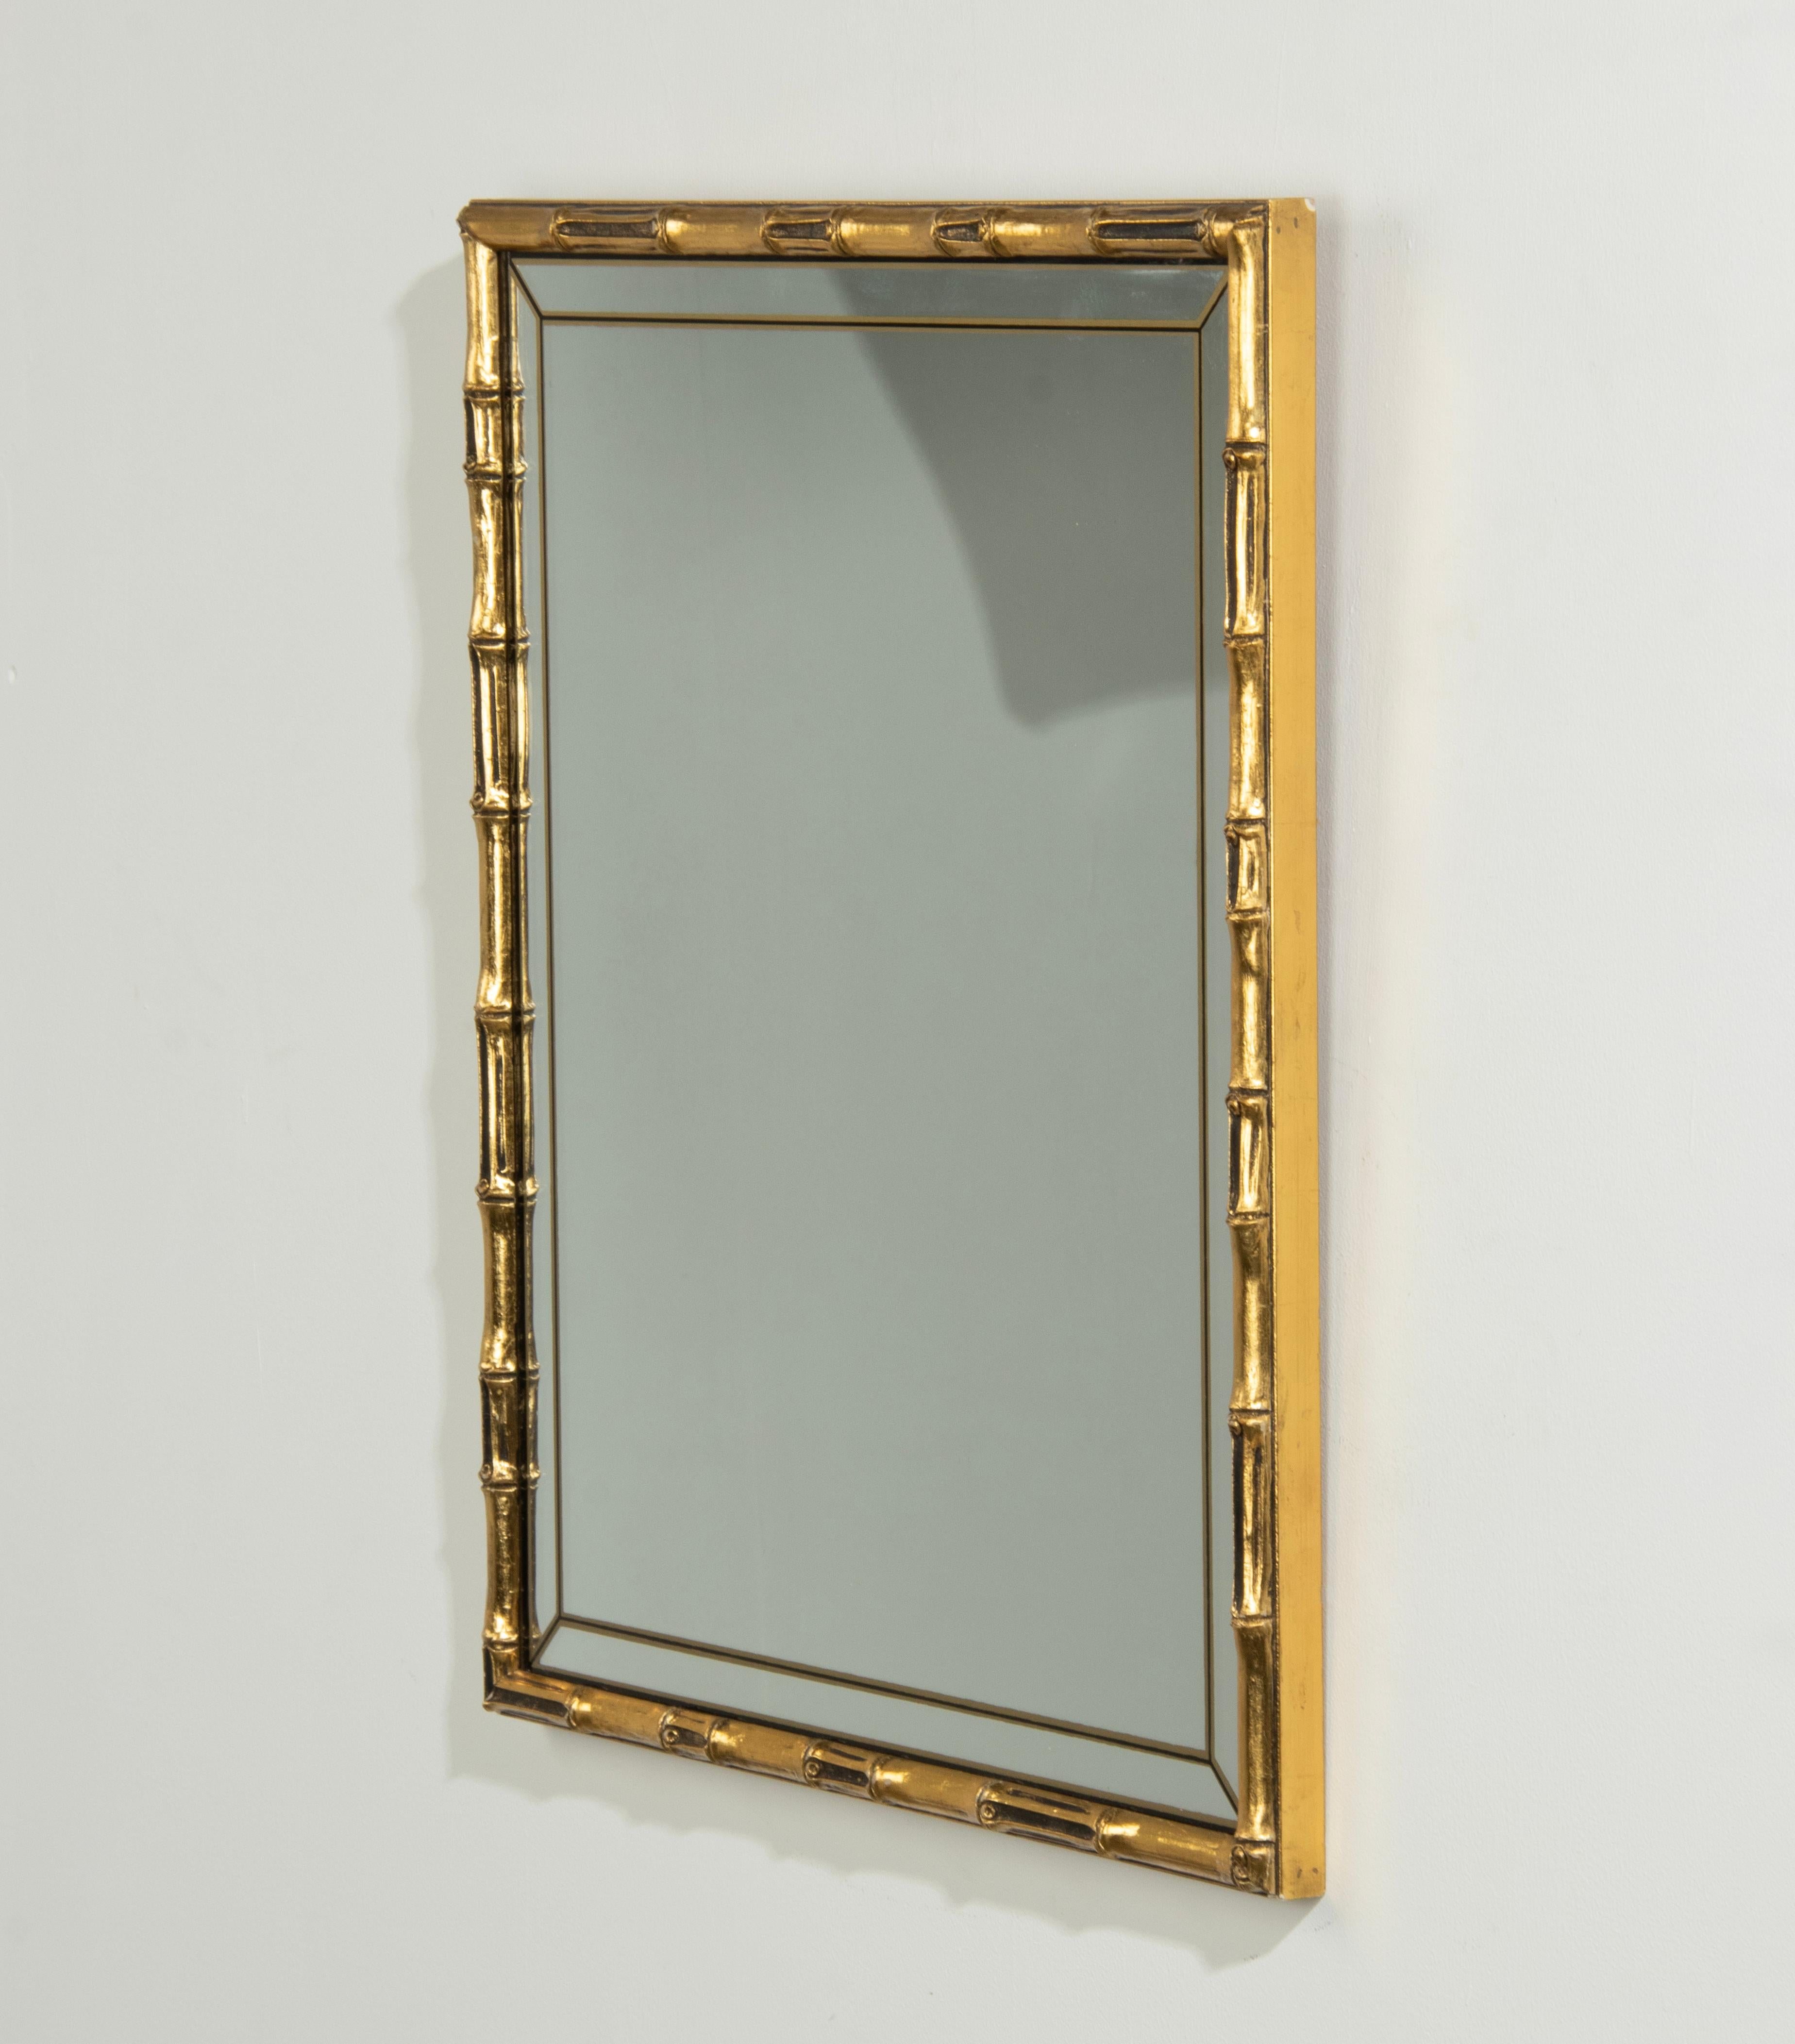 An elegant Hollywood Regency style giltwood mirror. The faux bamboo frame is made of moulded wood wit a gilt patina. The mirror glass has a decorative faux beveled glass which is made of hand printed black with gold striping. Made by Braddell